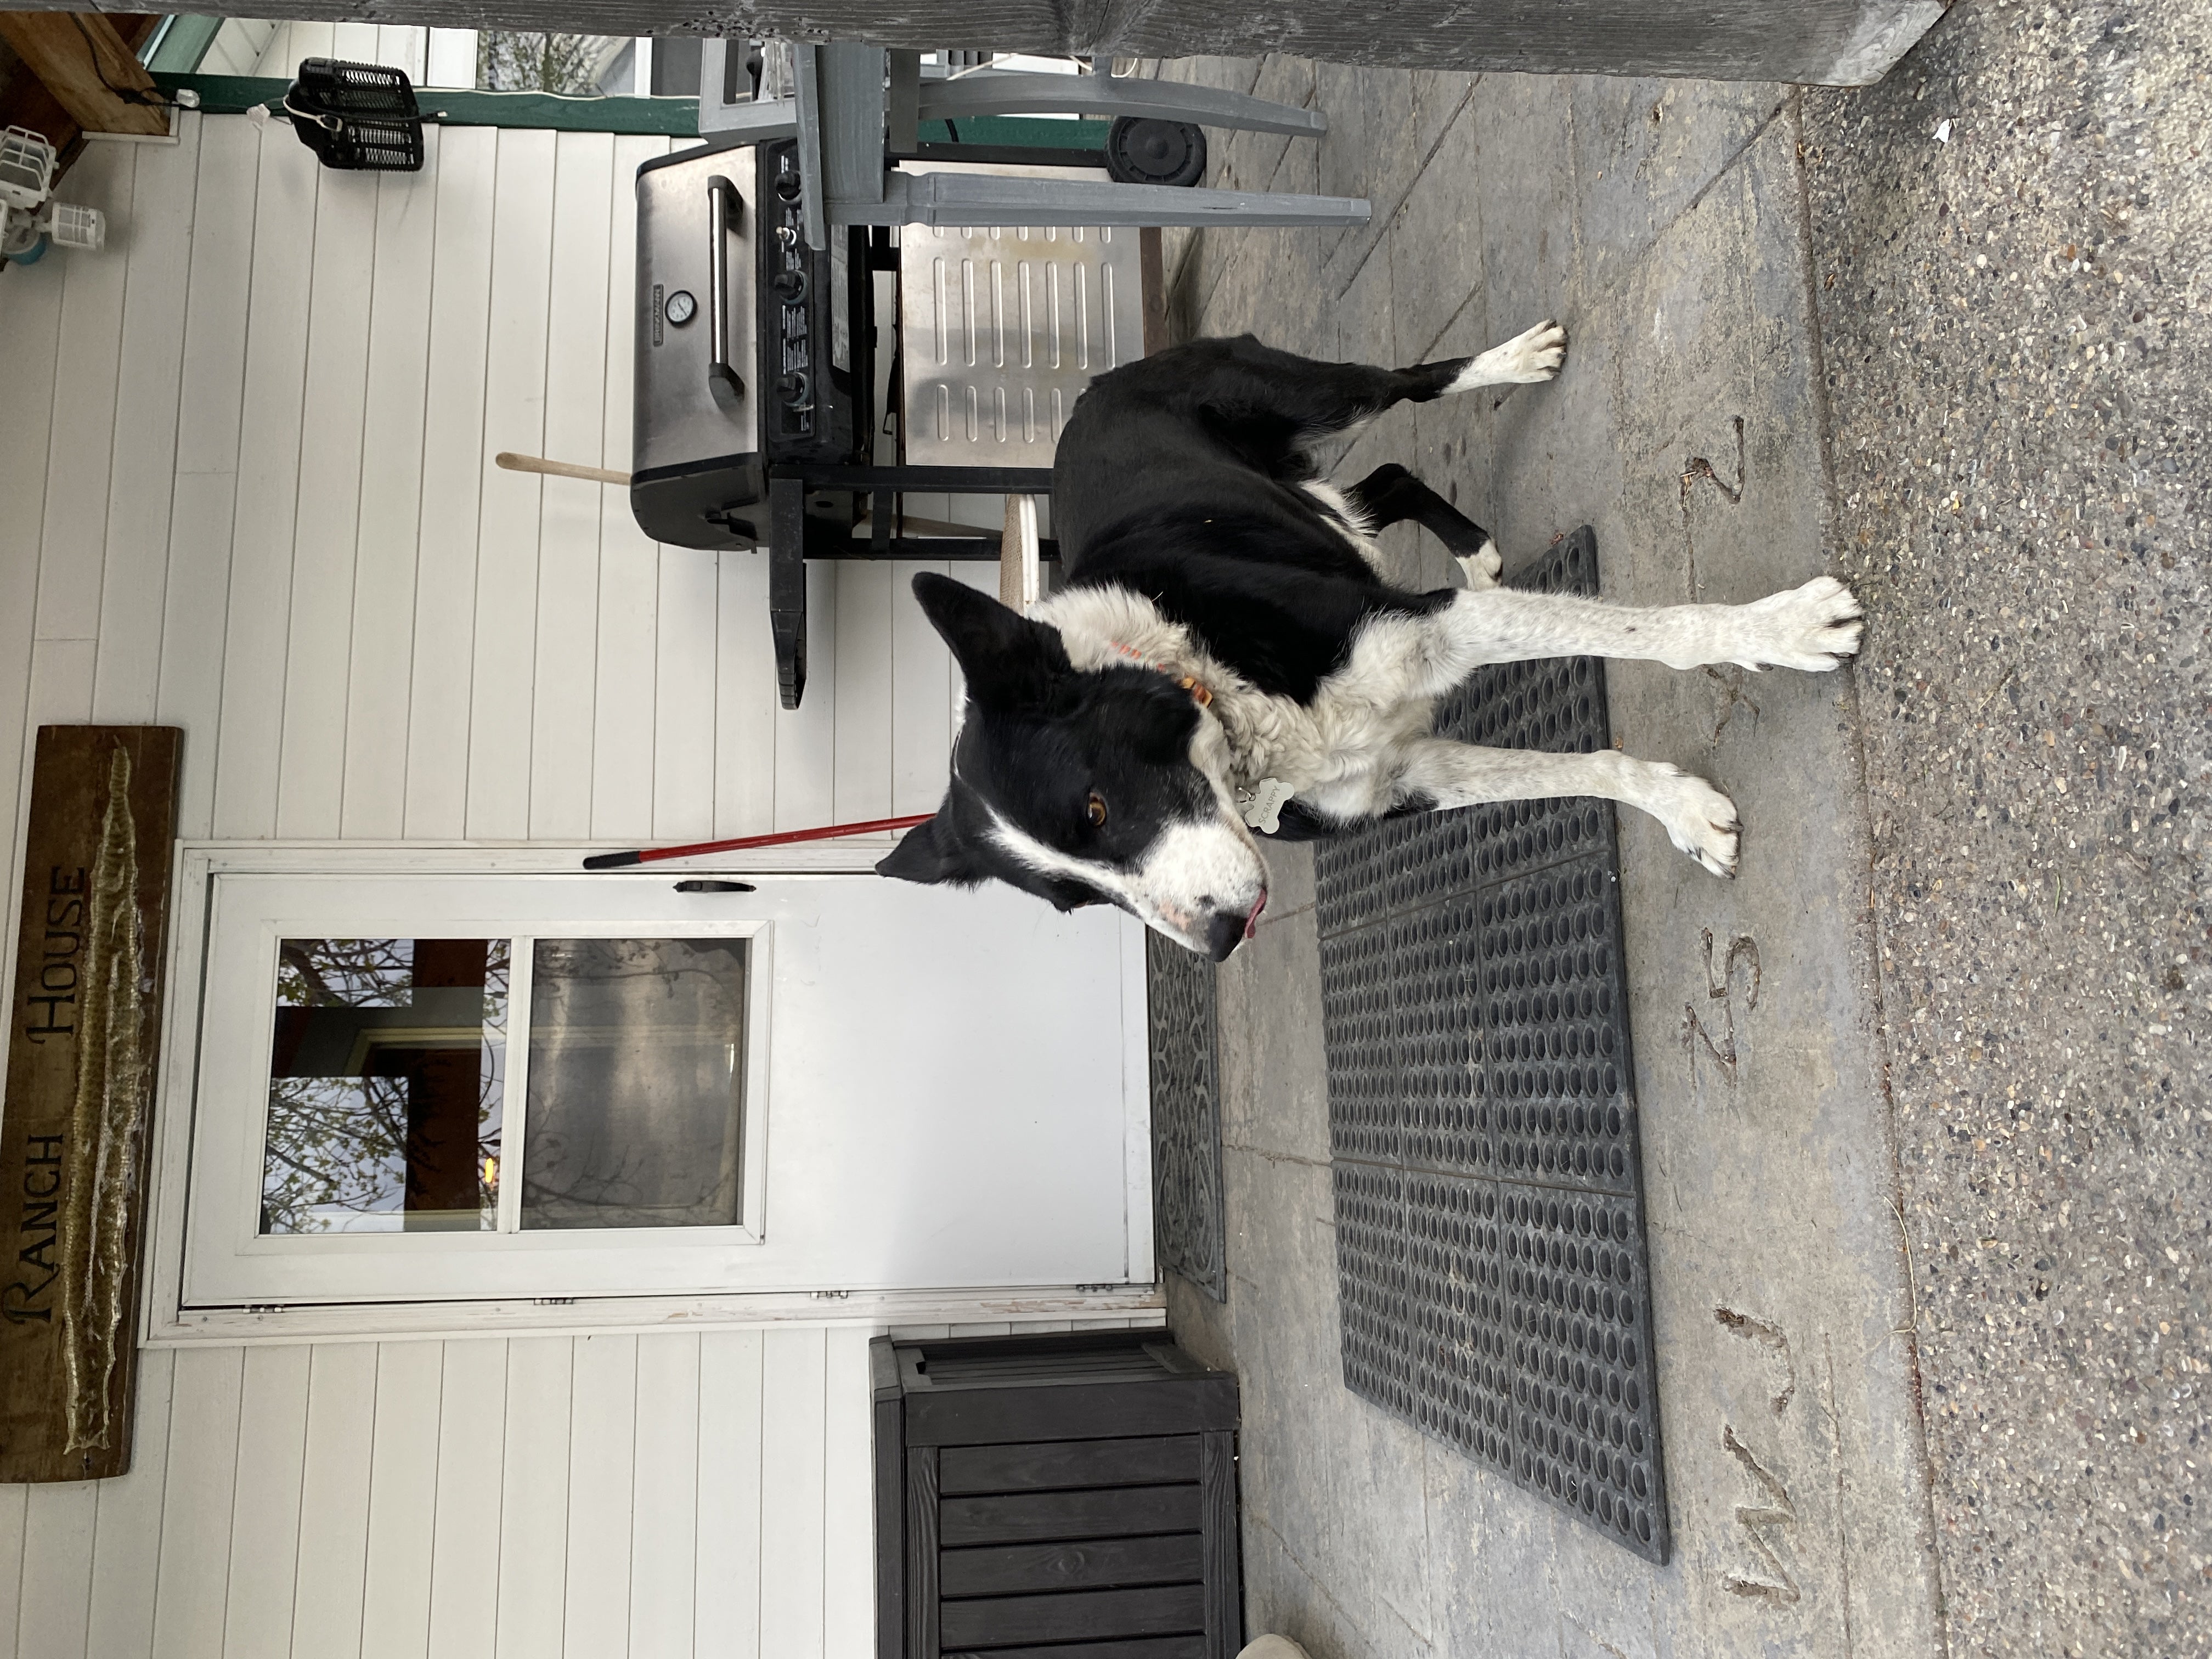 image shows a black and white sheepdog stands on the porch of a house. The sign above the door says "ranch house"